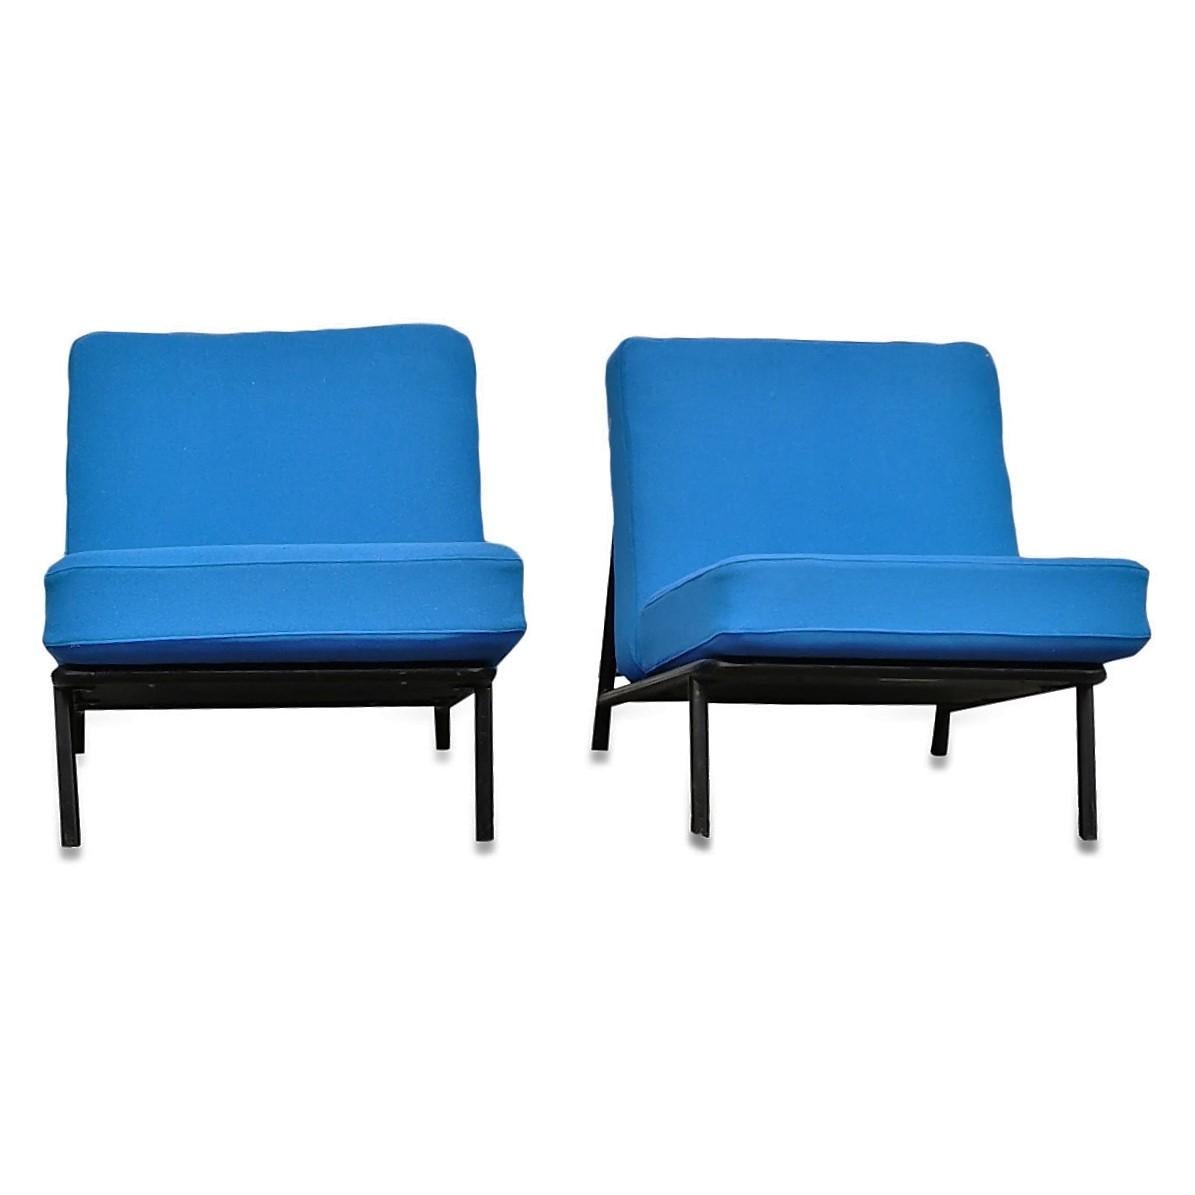 Tubular steel structure
Fresh upholstery; Kvadrat wool fabric
enameled steel structure
some scruffs on paint;
Artifort signature on one chair
these seats are currently in France, will ship out of Paris, allow 5 to 8 days for delivery any